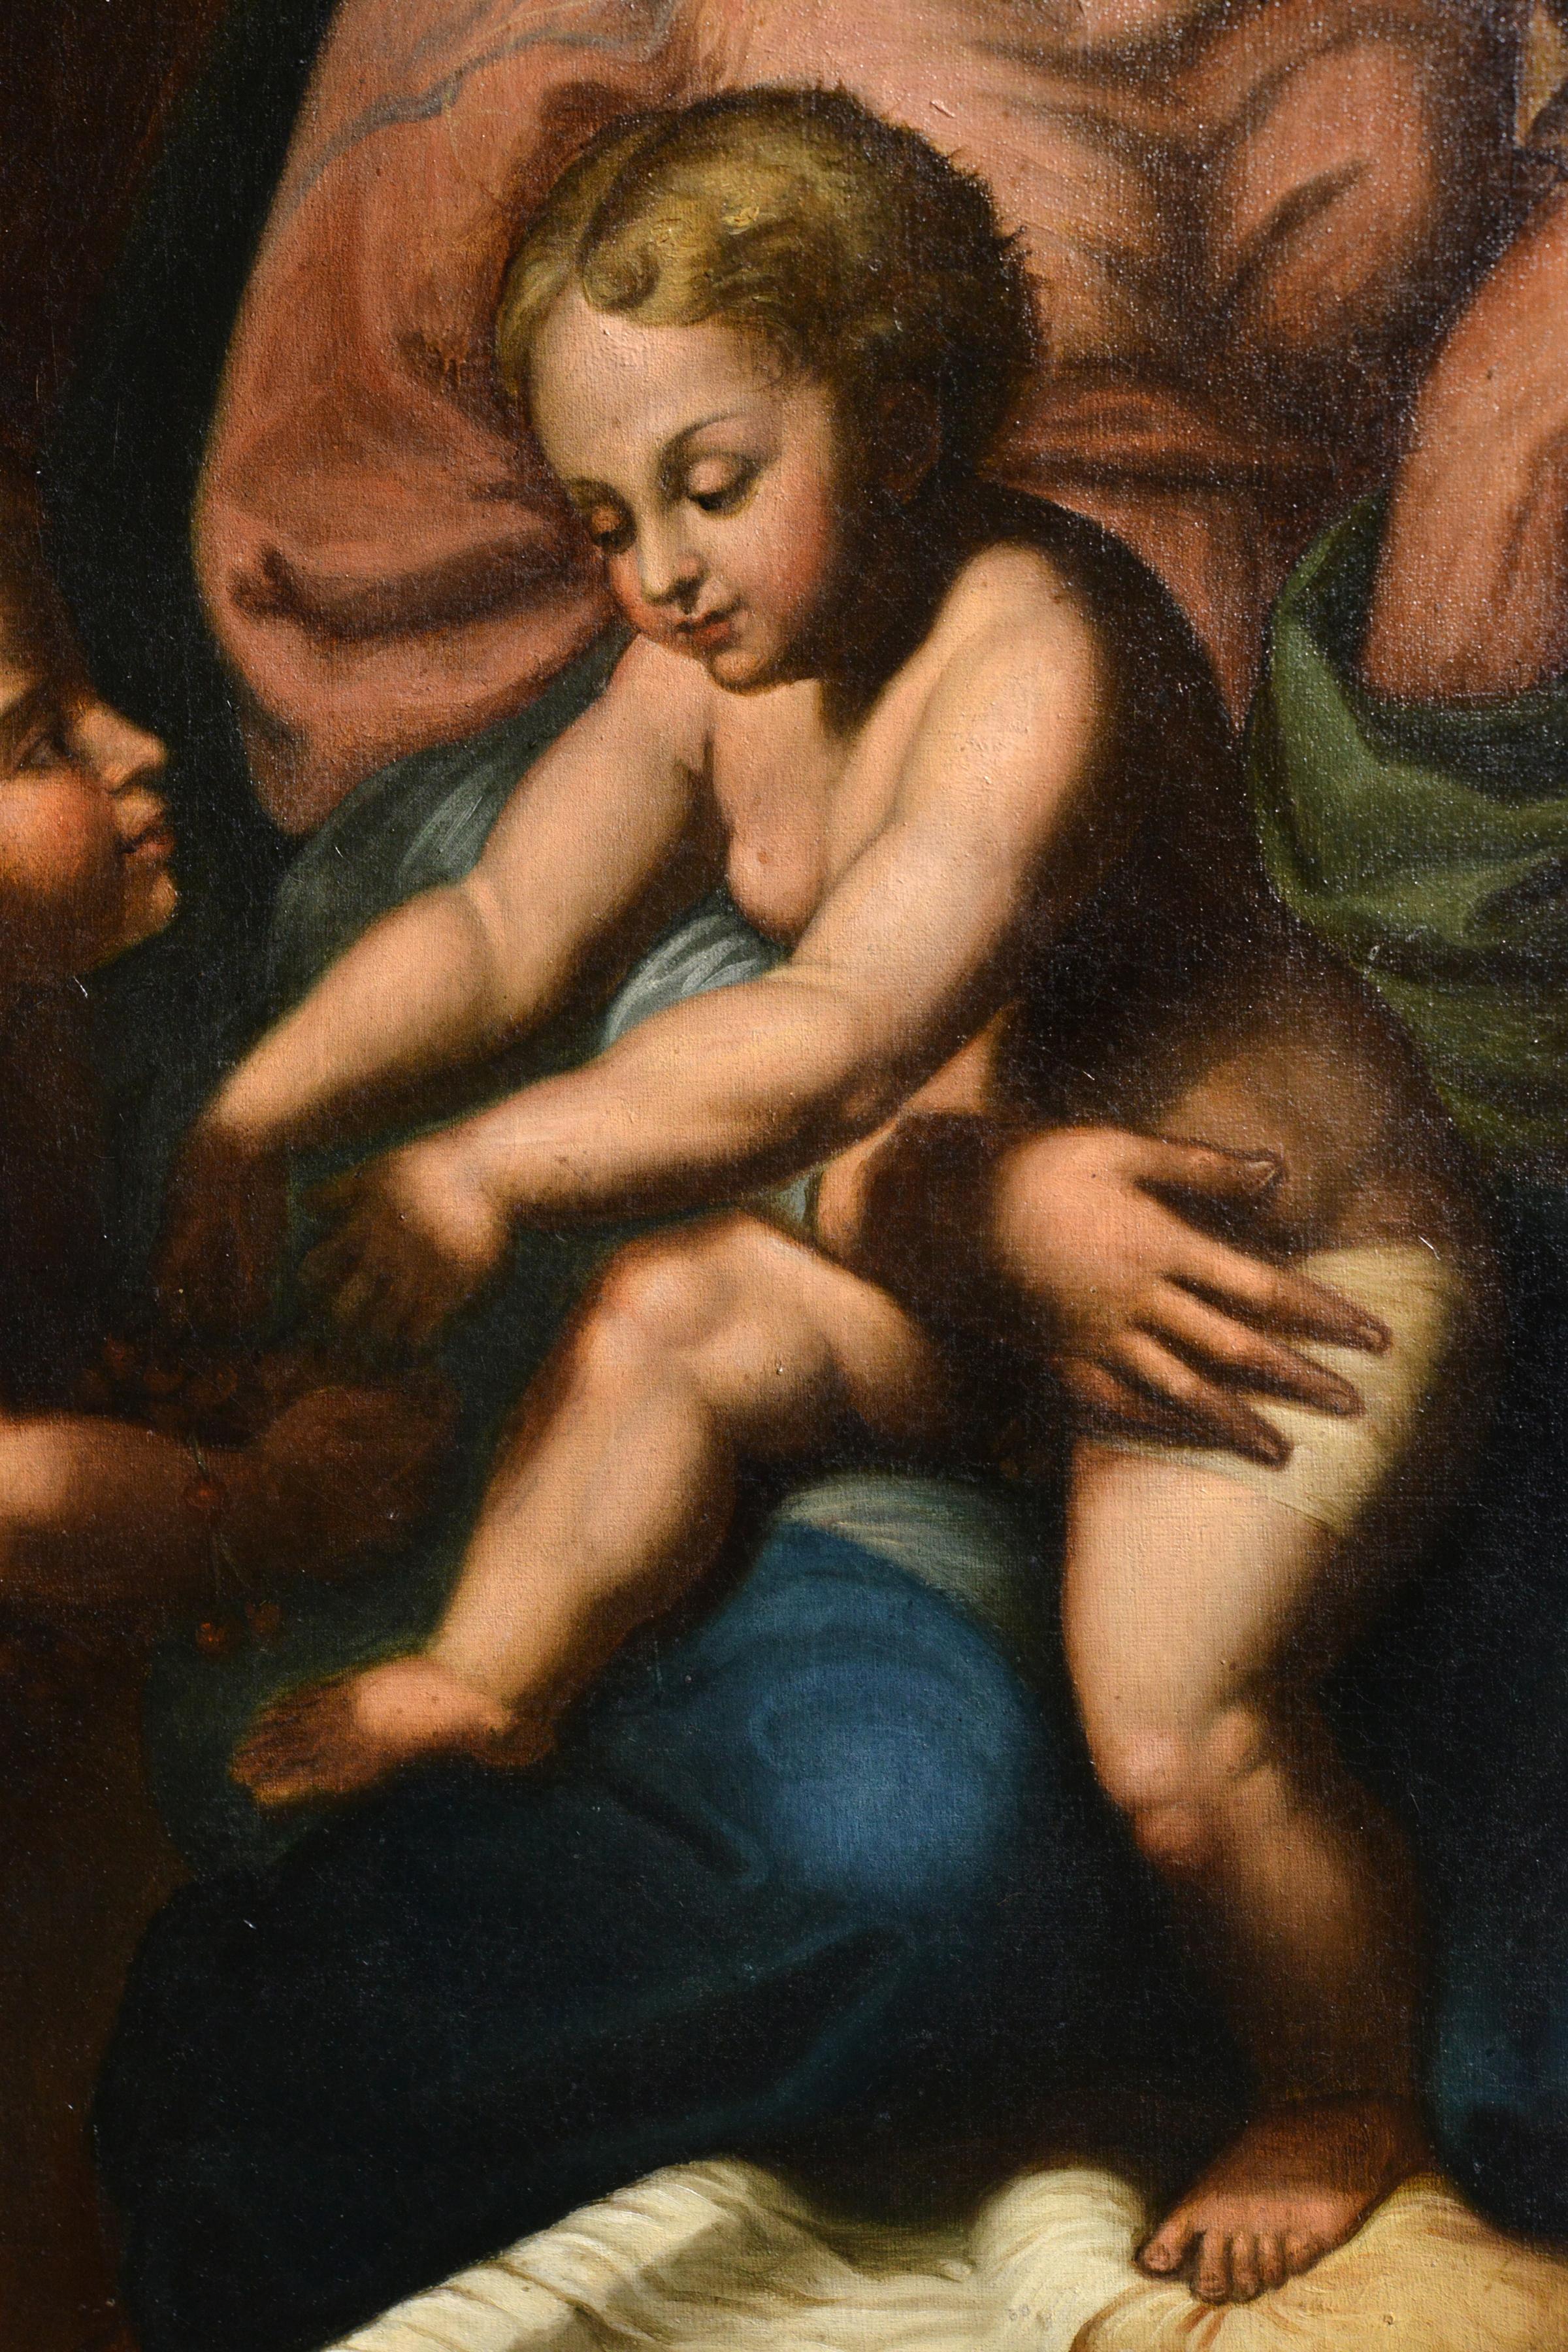 This tender depiction of the Holy Family represents a subject which was central to Raphael's oeuvre. The painting is based on the famous panel by Giulio Romano, called Madonna della Gatta, now in the Museo Nazionale di Capodimonte in Naples. The